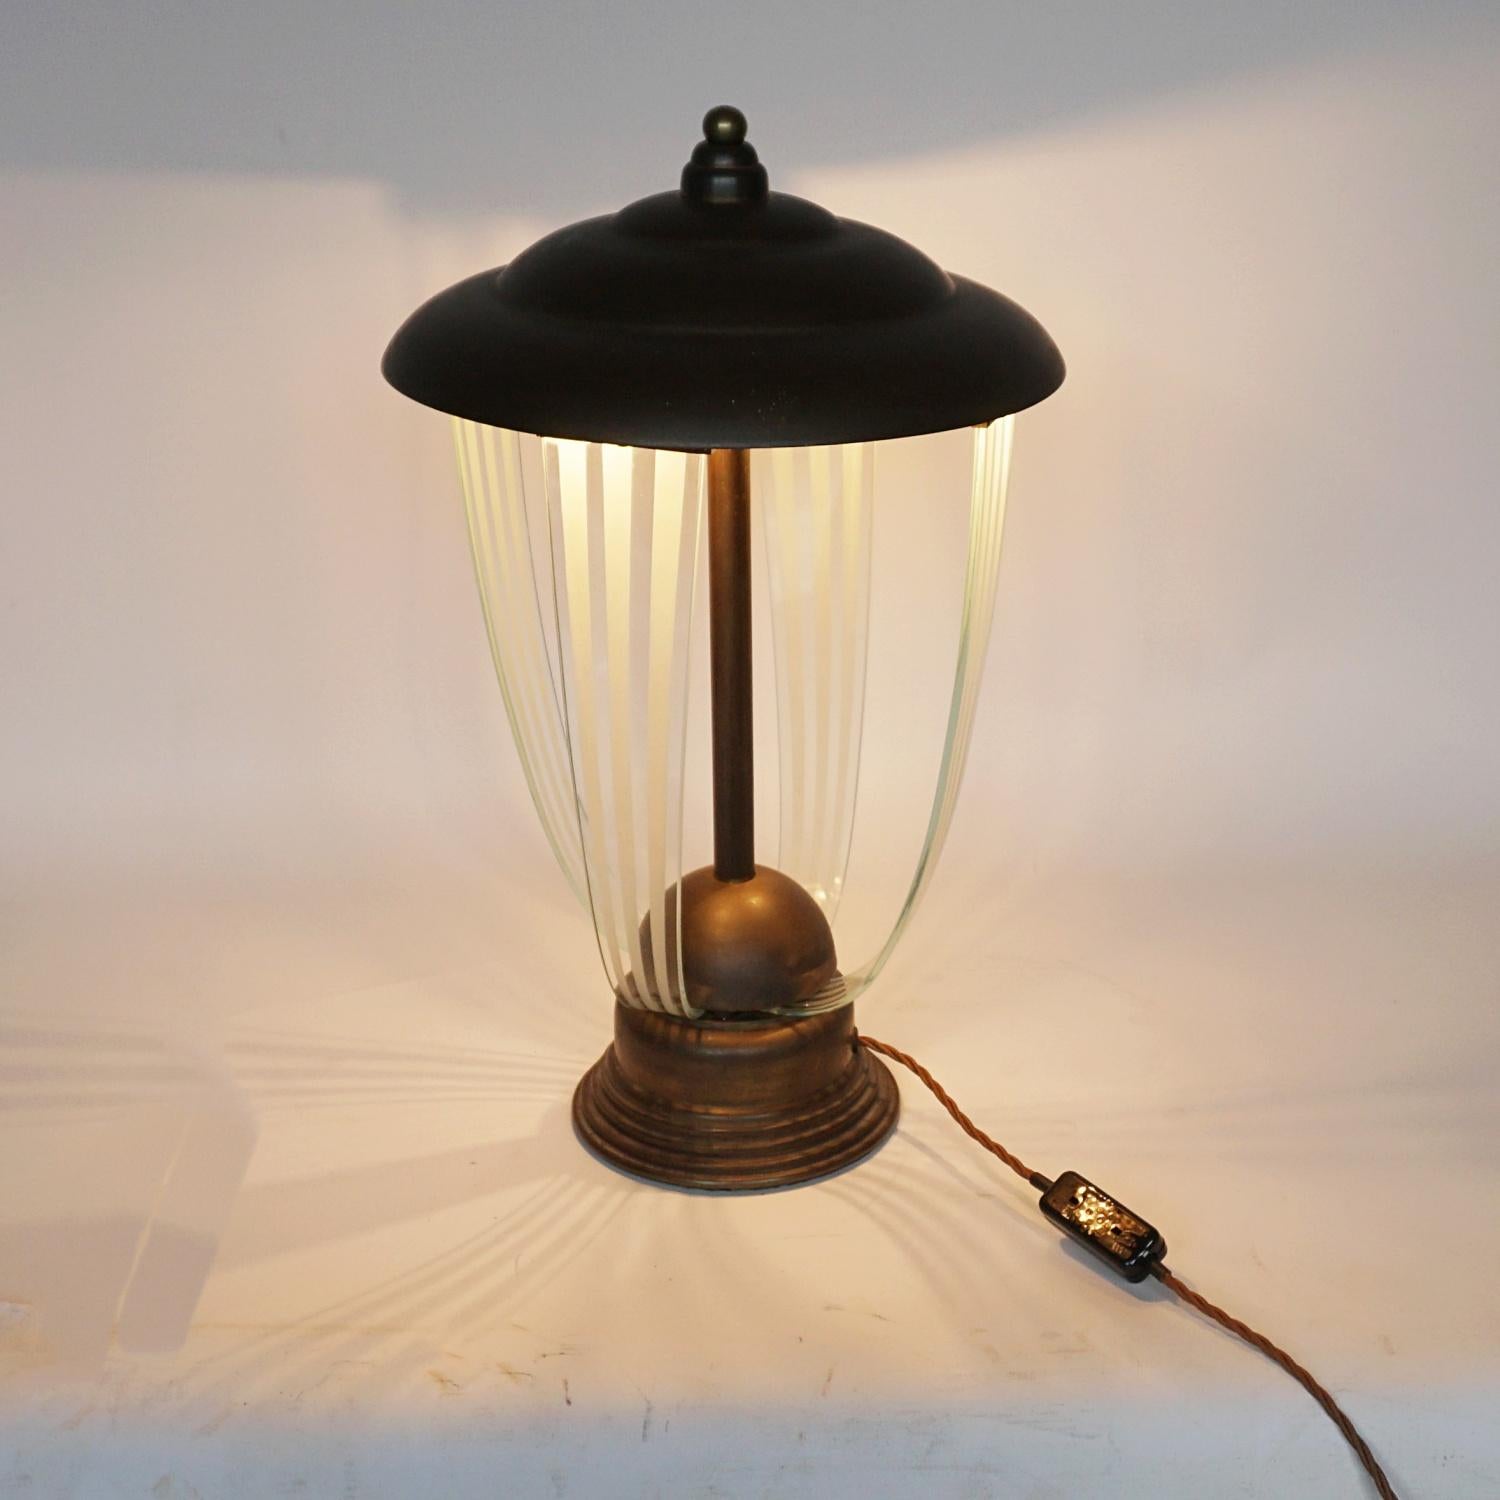 An Art Deco decorative table lamp. Four curved glass connectors outside of a central copper rod. Copper graduating shade and circular copper base. Brass ball finial to top.

Dimensions: H 49cm D 30cm 

Origin: English

Item Number: